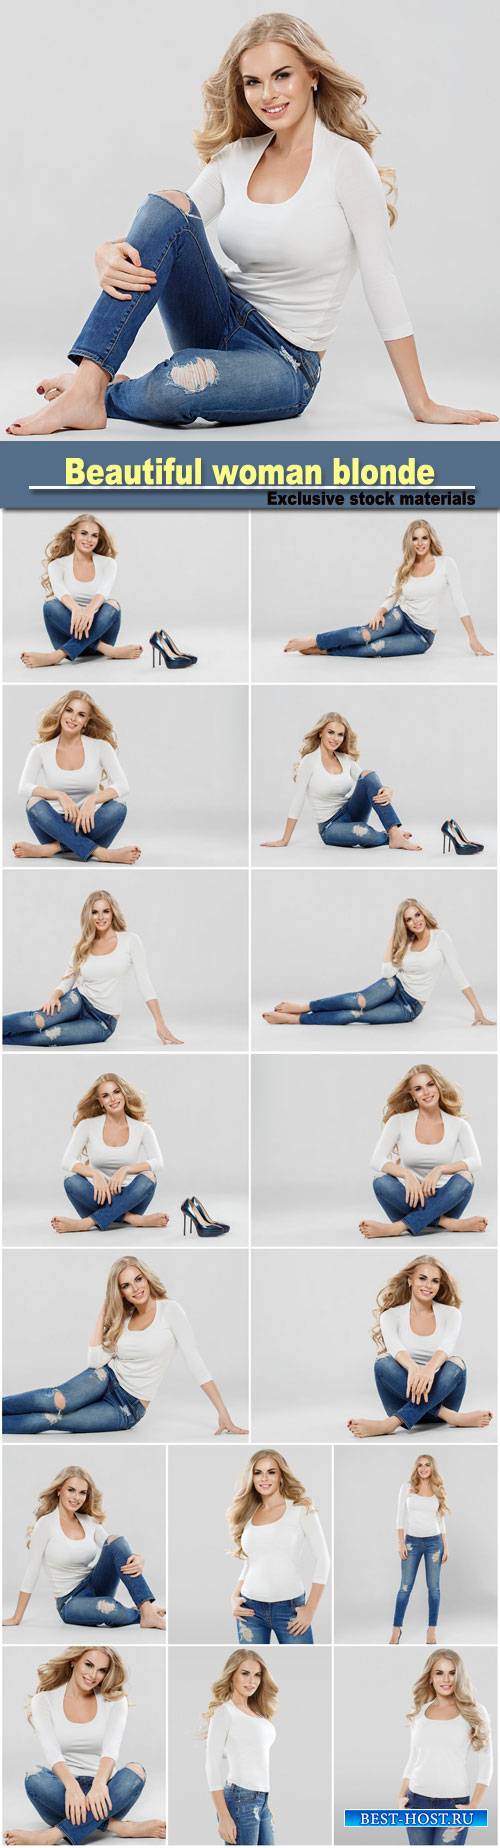 Beautiful woman blonde curly hair sexy portrait jeans fashion